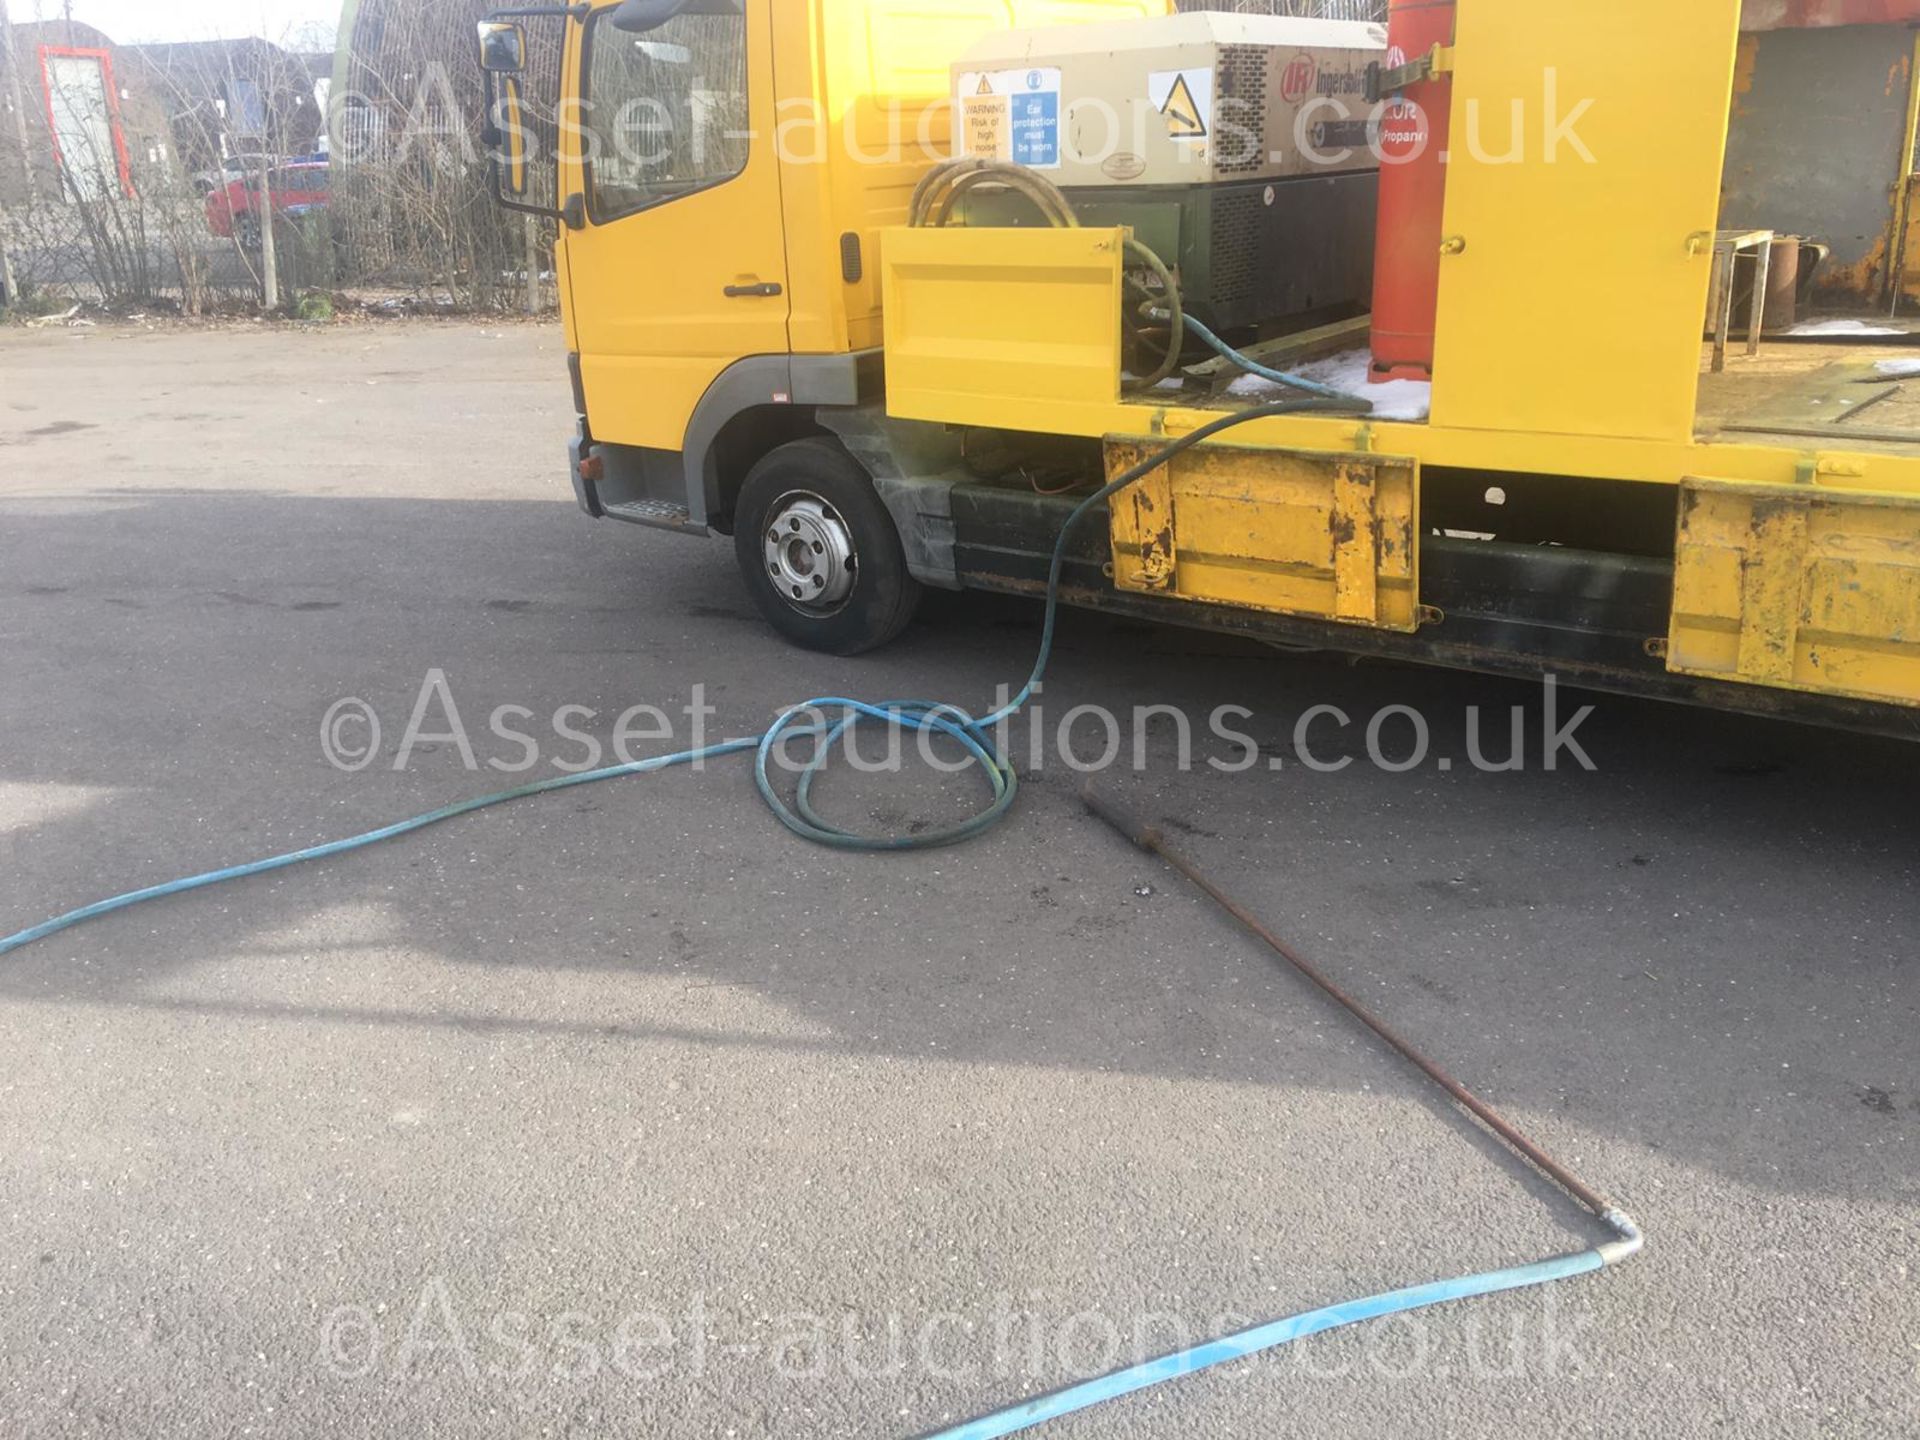 2004/54 REG MERCEDES ATEGO 1018 DAY YELLOW DROPSIDE LINE PAINTING LORRY 4.3L DIESEL ENGINE *NO VAT* - Image 13 of 128